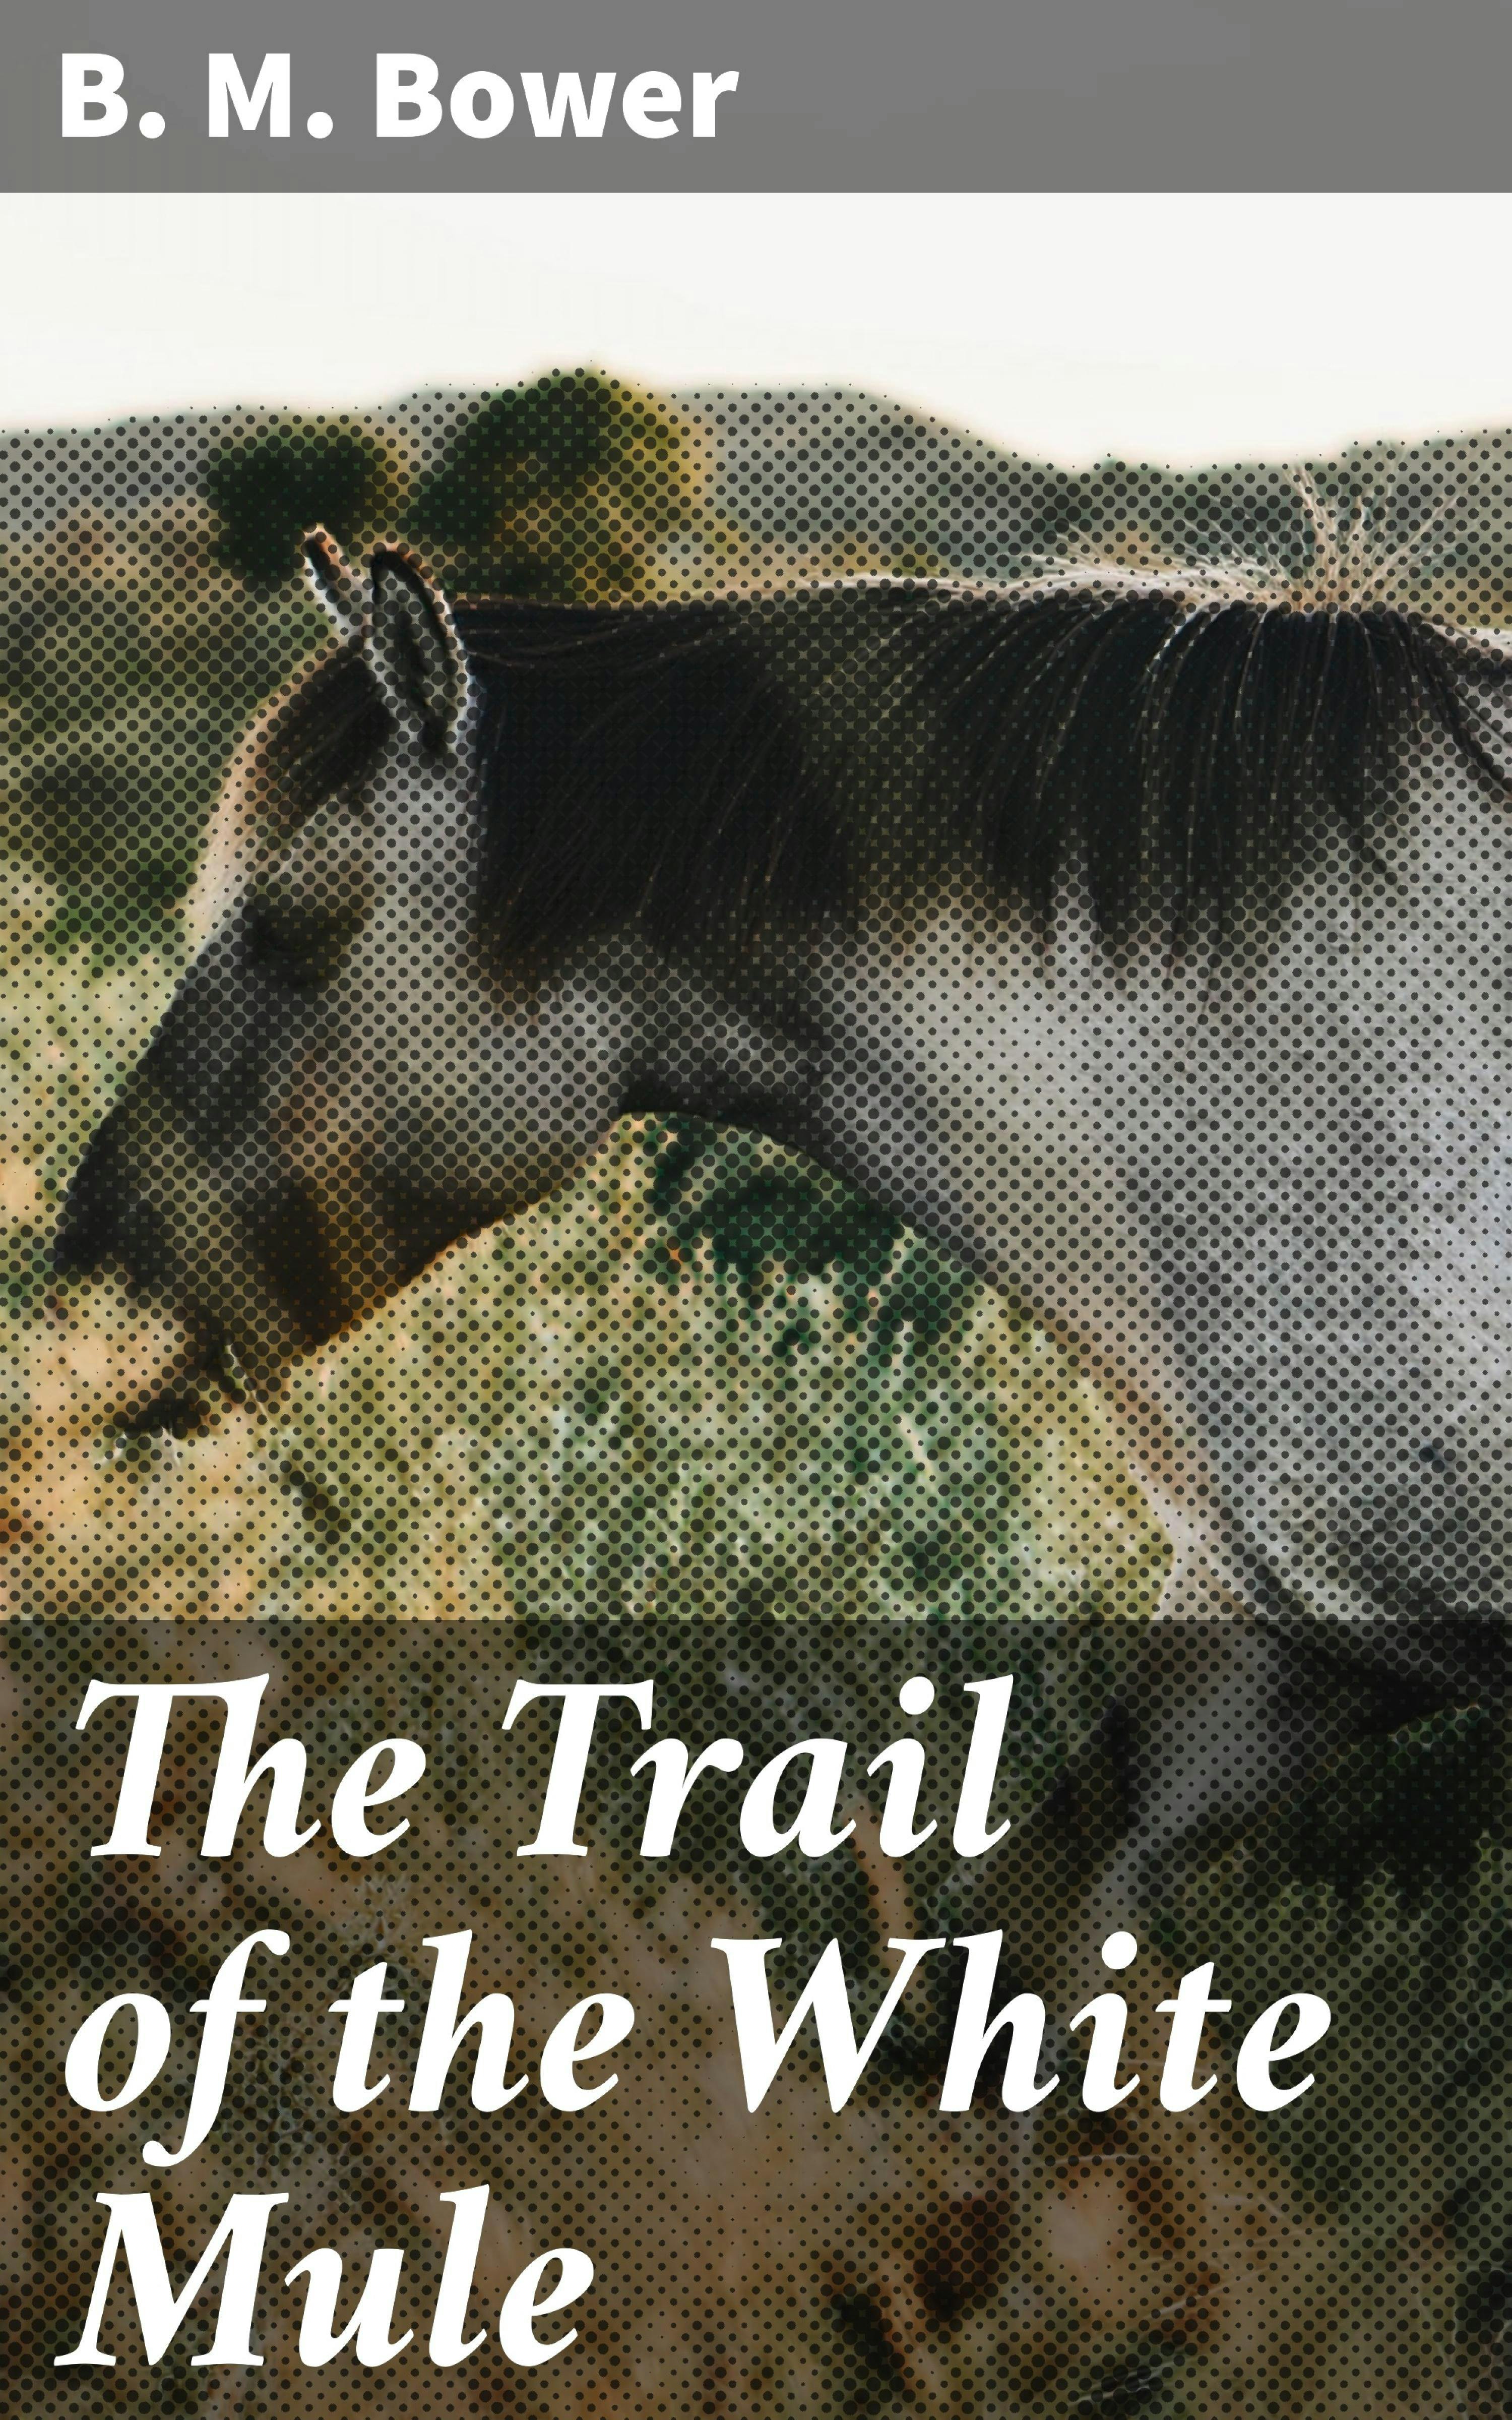 The Trail of the White Mule - B. M. Bower